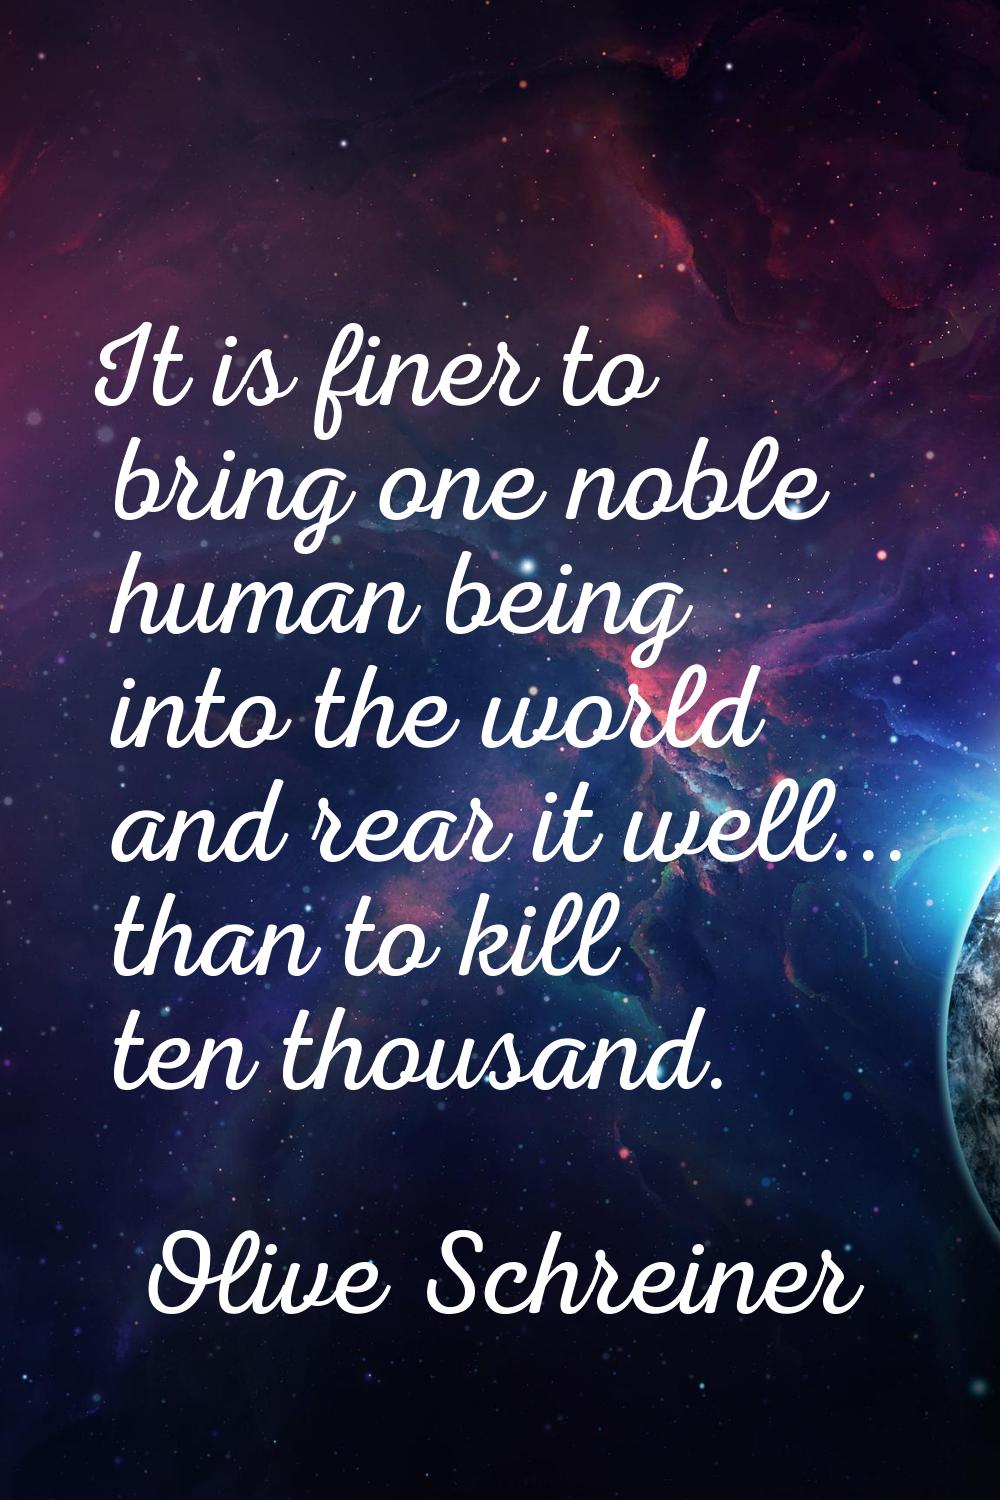 It is finer to bring one noble human being into the world and rear it well... than to kill ten thou